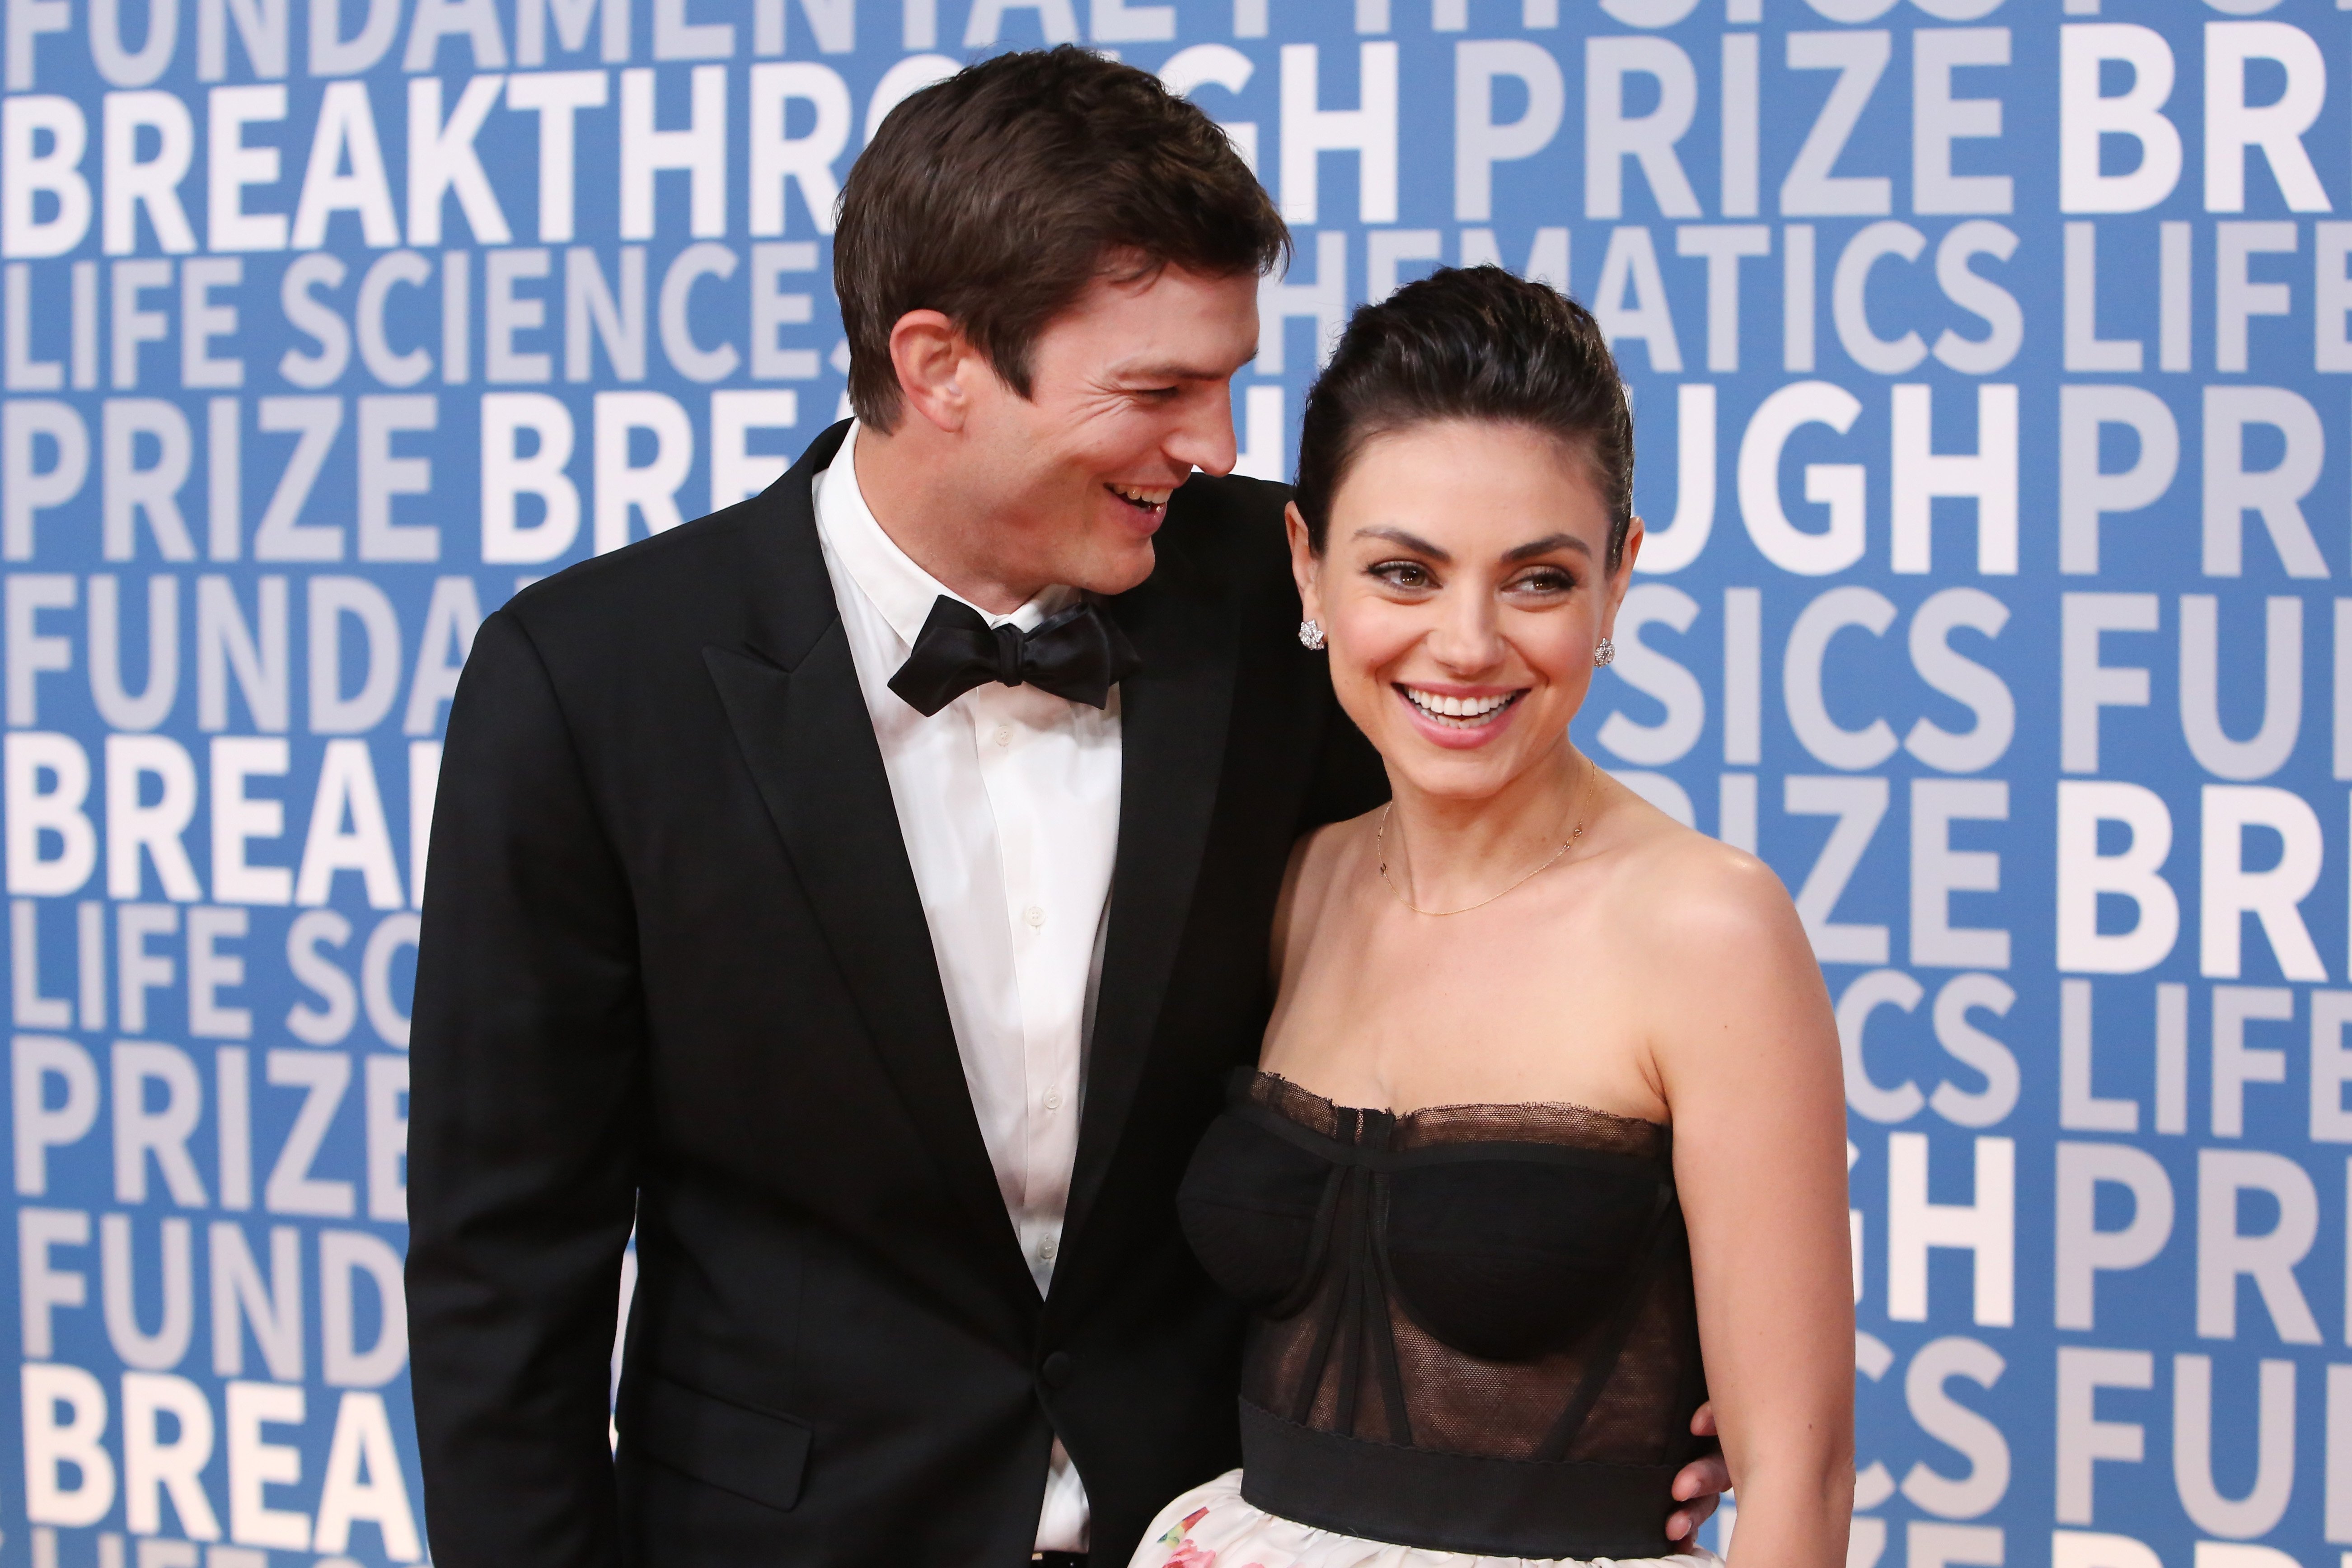 Ashton Kutcher and Mila Kunis pictured at the 2018 Breakthrough Prize at NASA Ames Research Center, 2017, Mountain View, California. | Photo: Getty Images